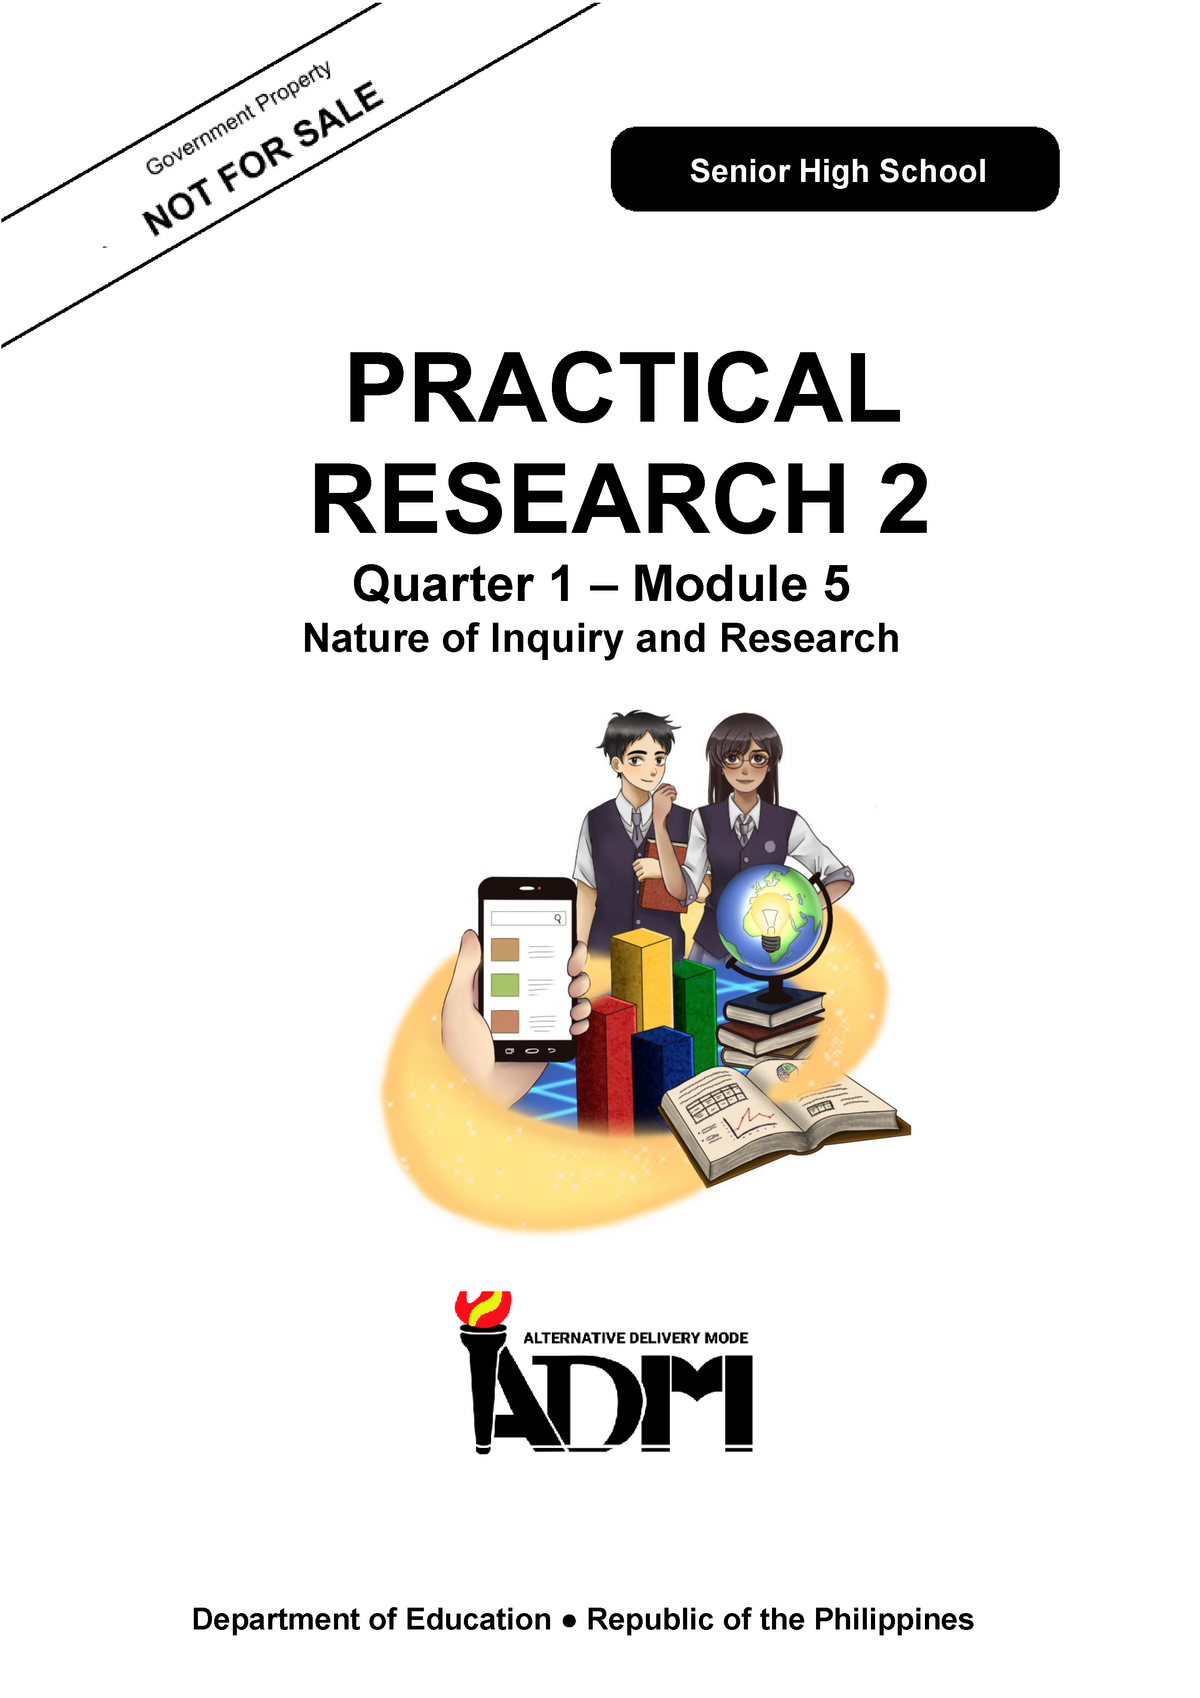 how many chapter in practical research 2